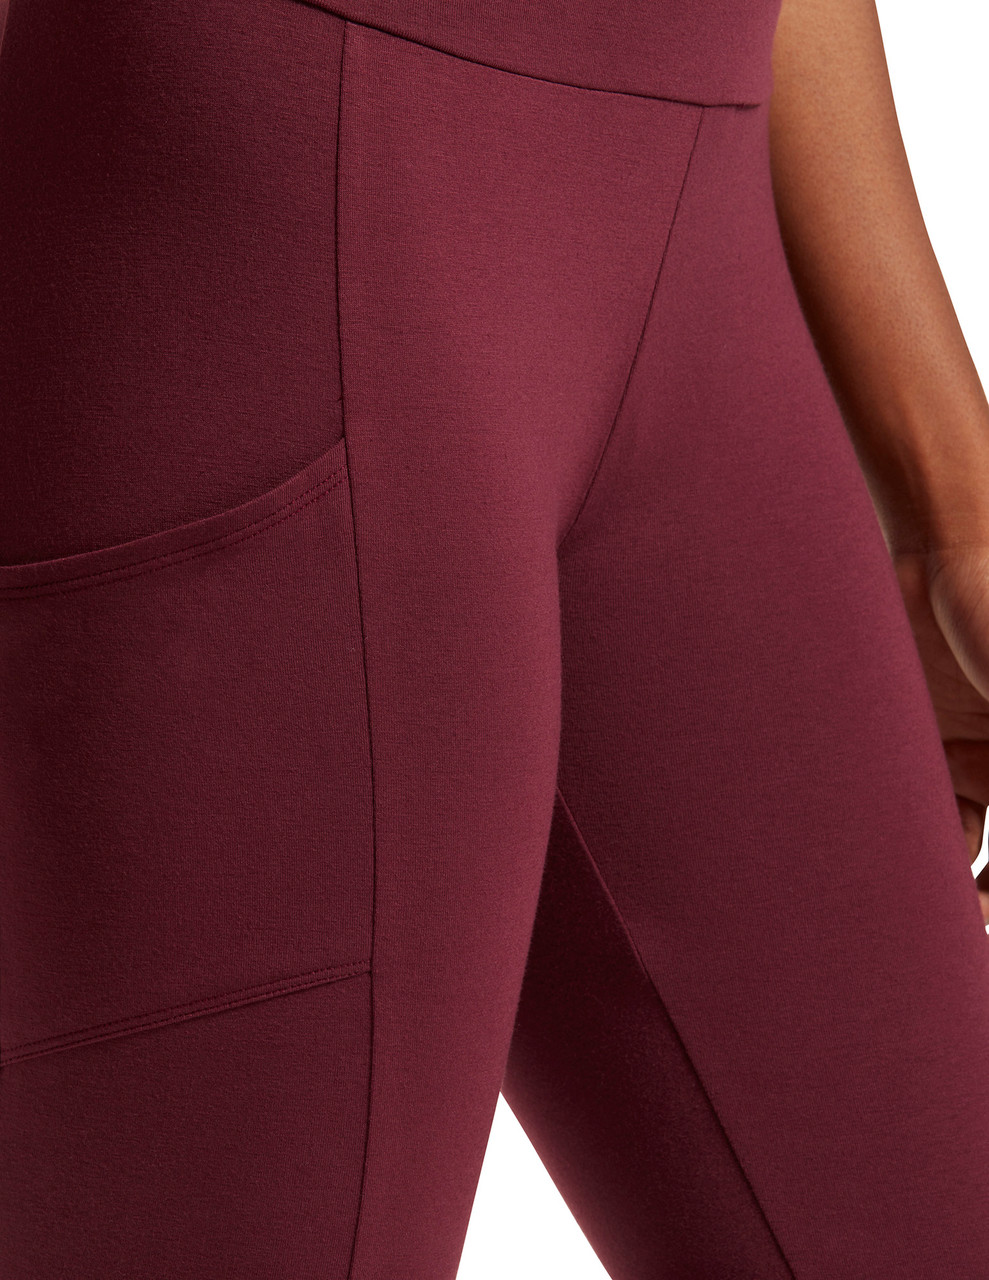 Buy No Nonsense Women's Leggings with Pockets, High Waisted Soft